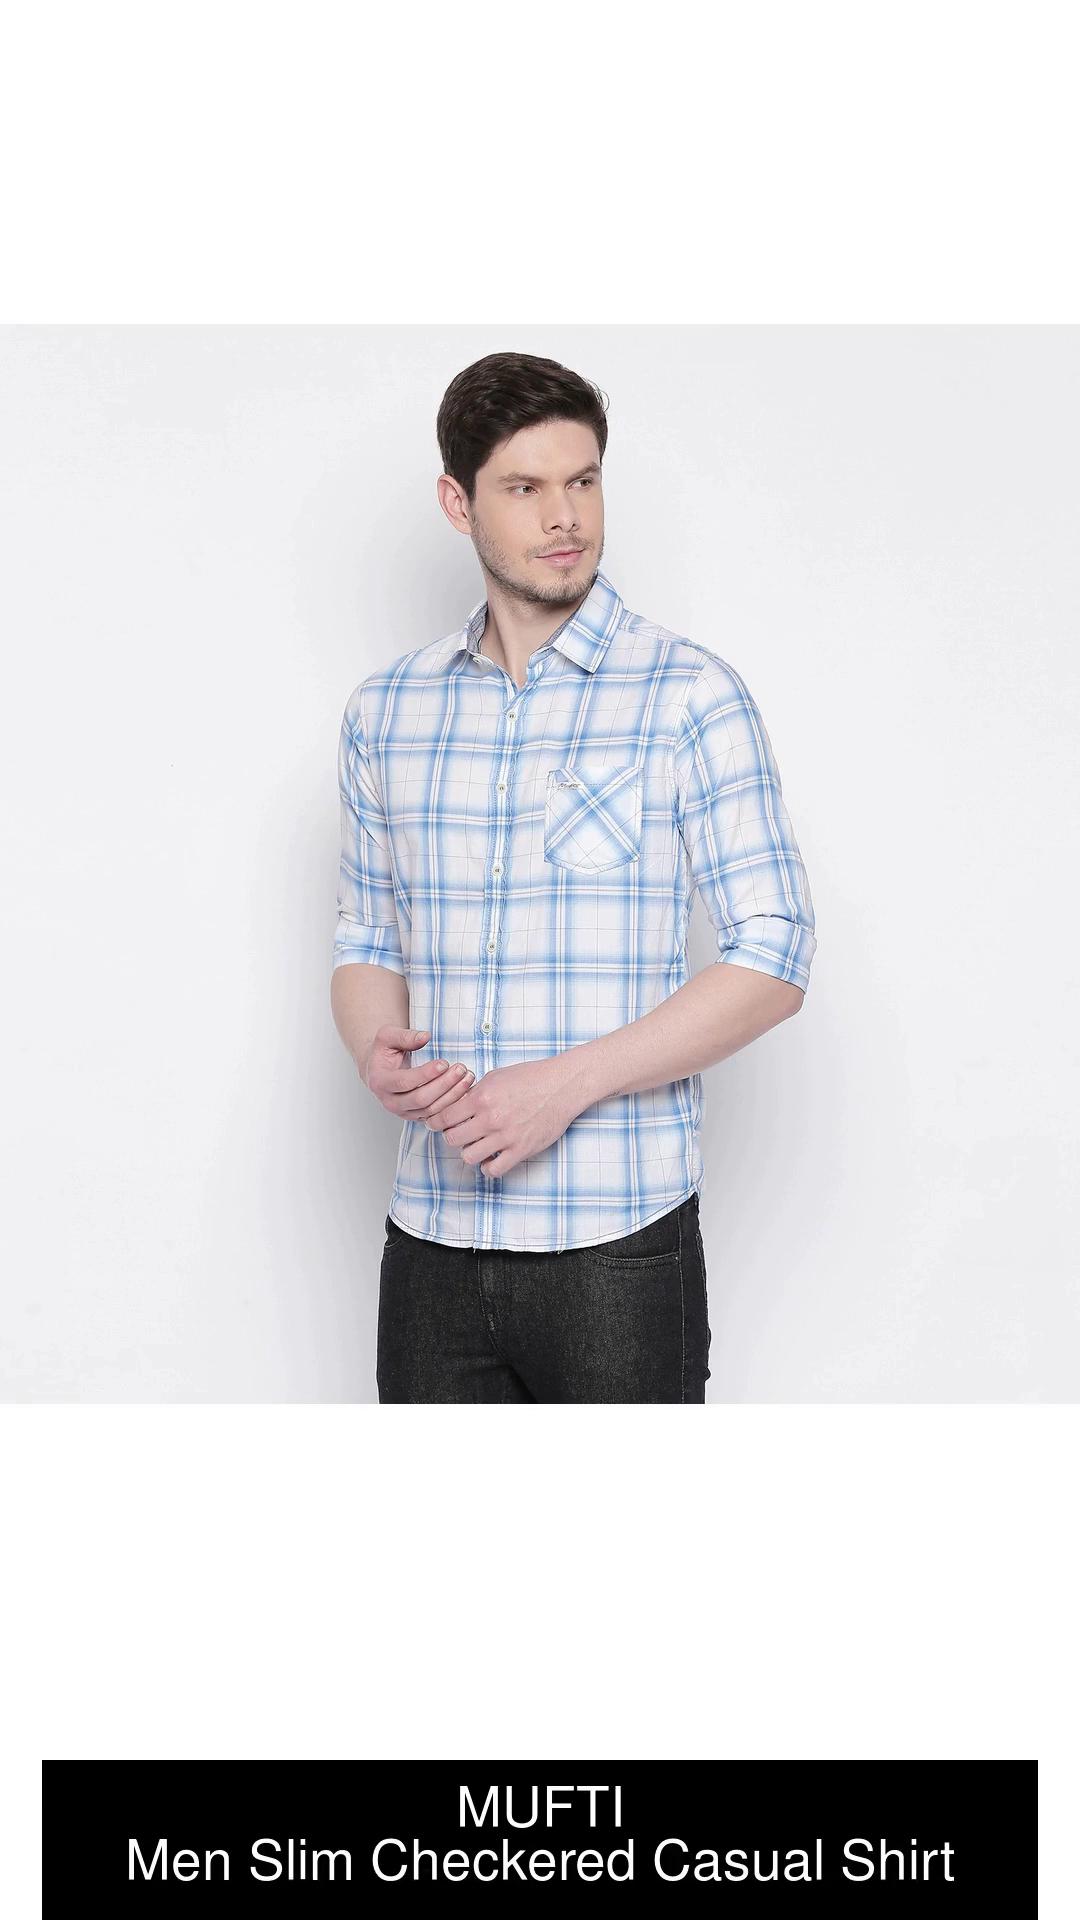 Buy Black & White Graphic Check Slim Fit Casual Shirt Online at Muftijeans